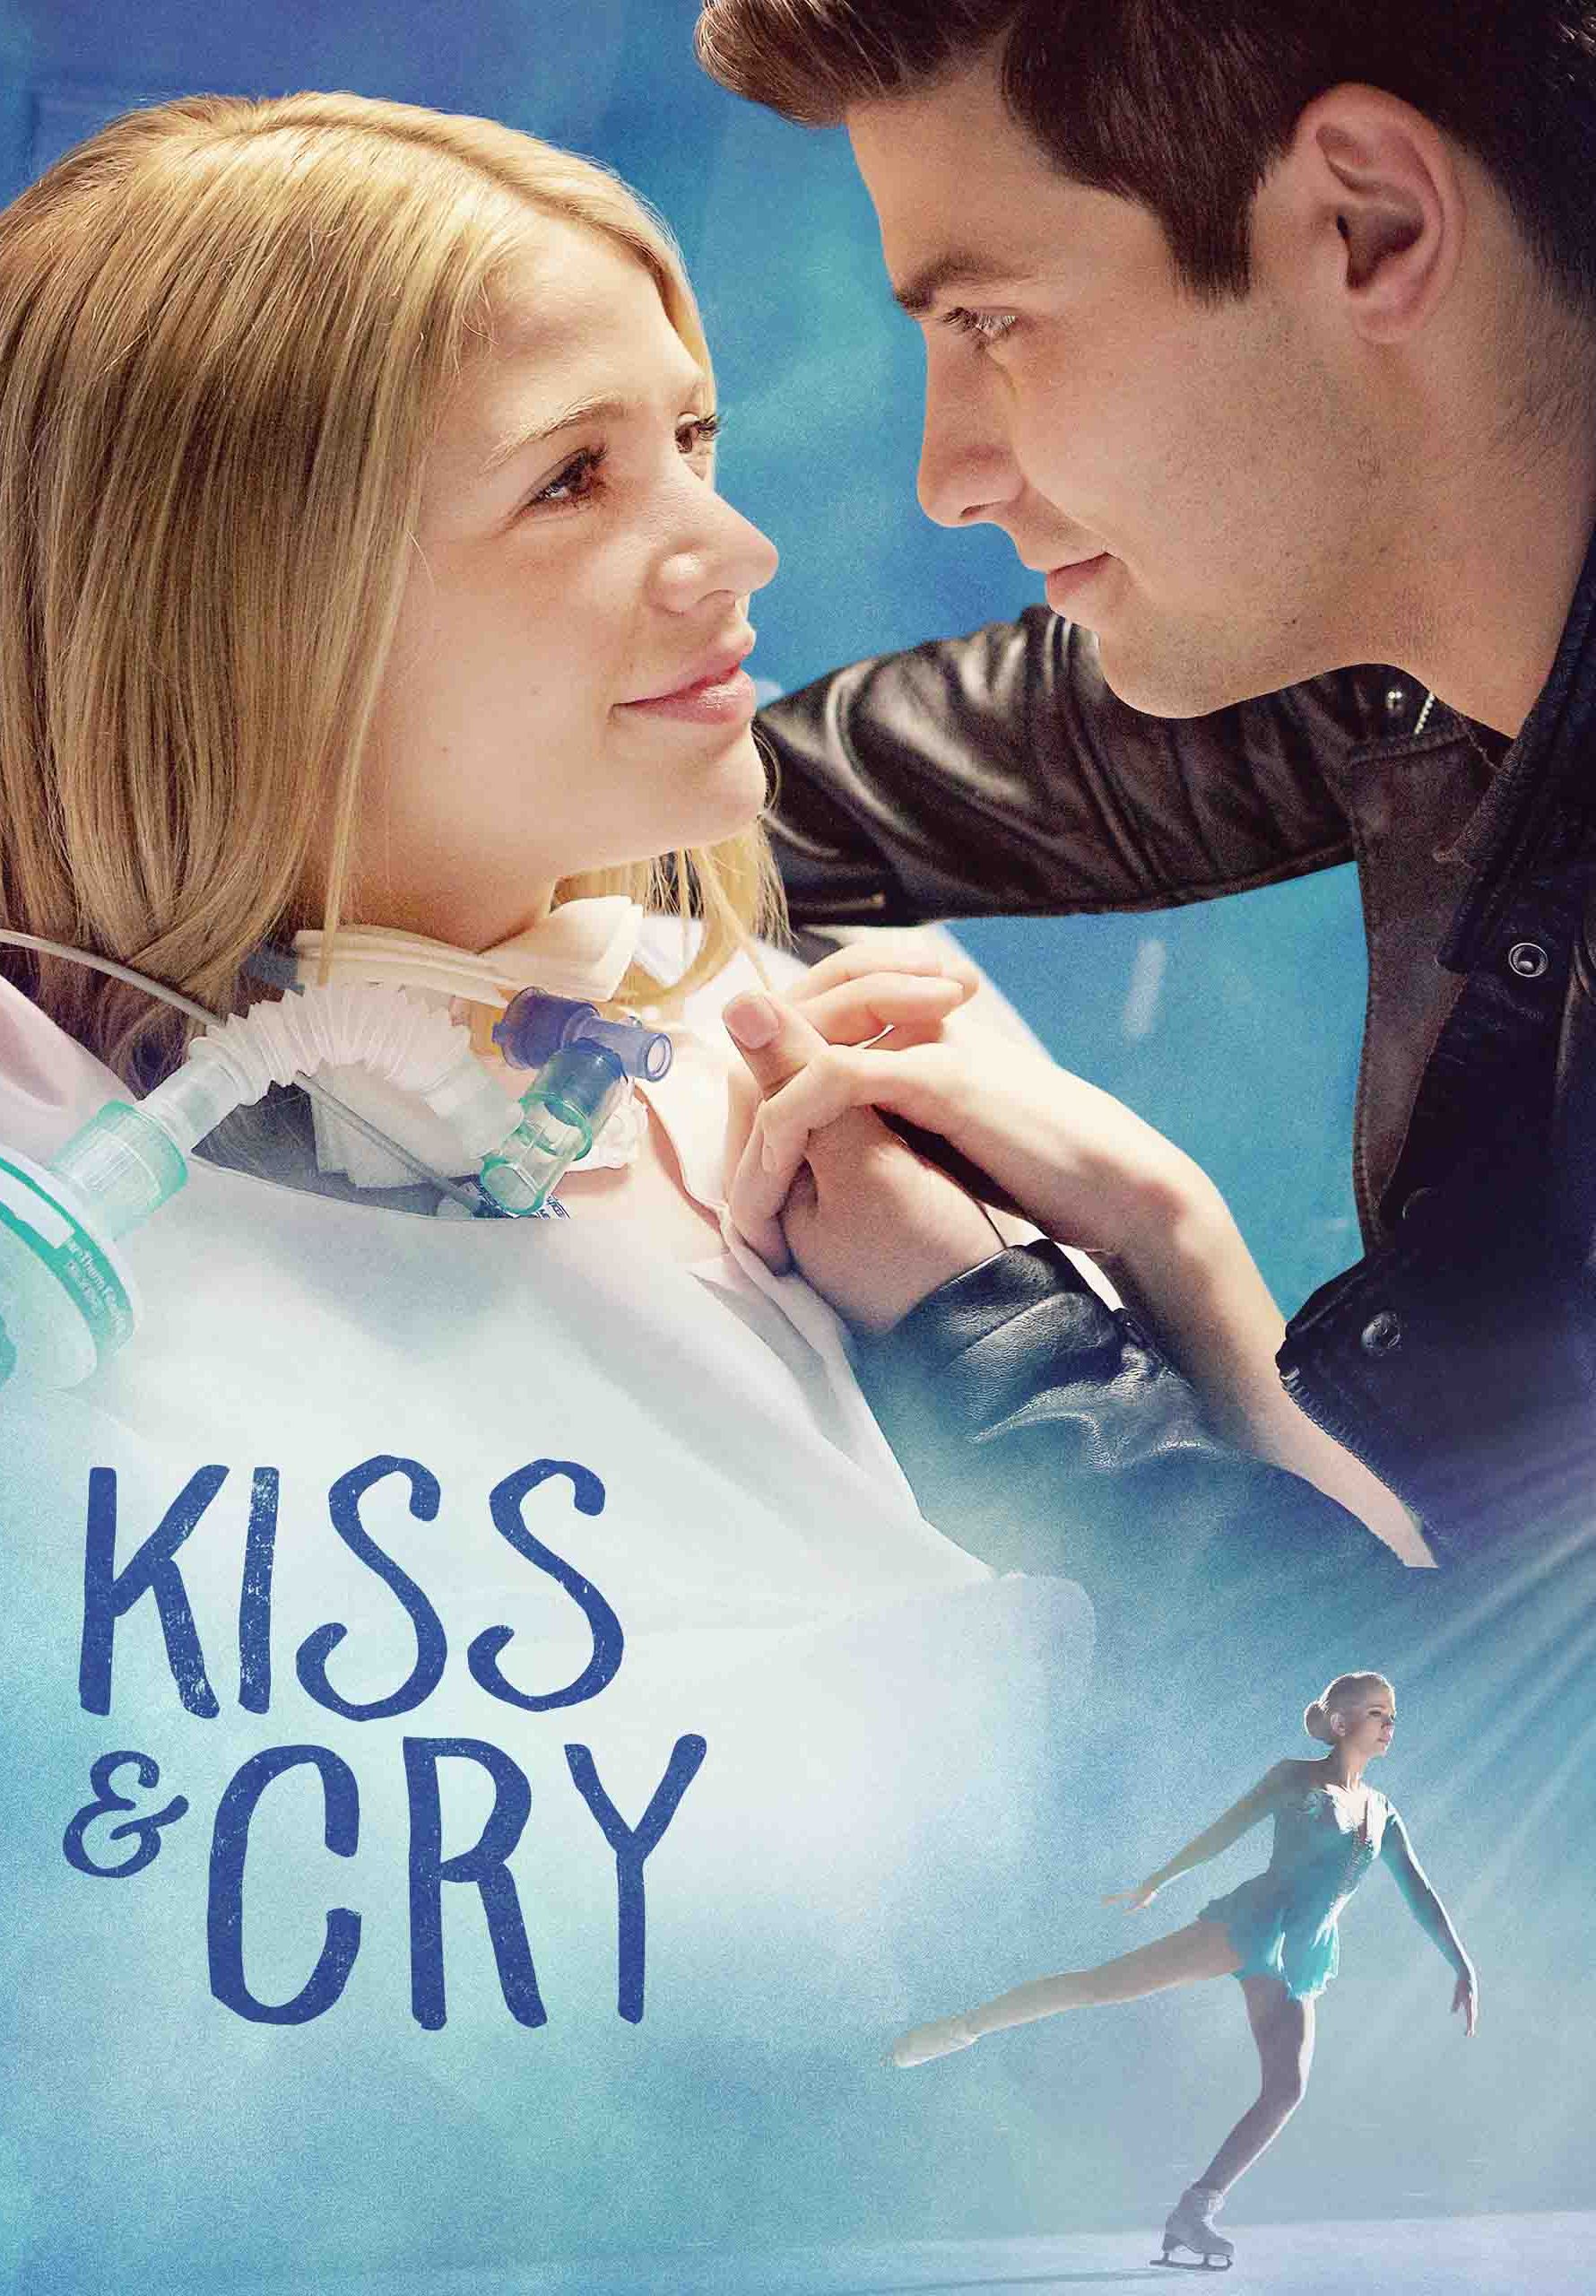 Kiss and Cry [HD] (2017)